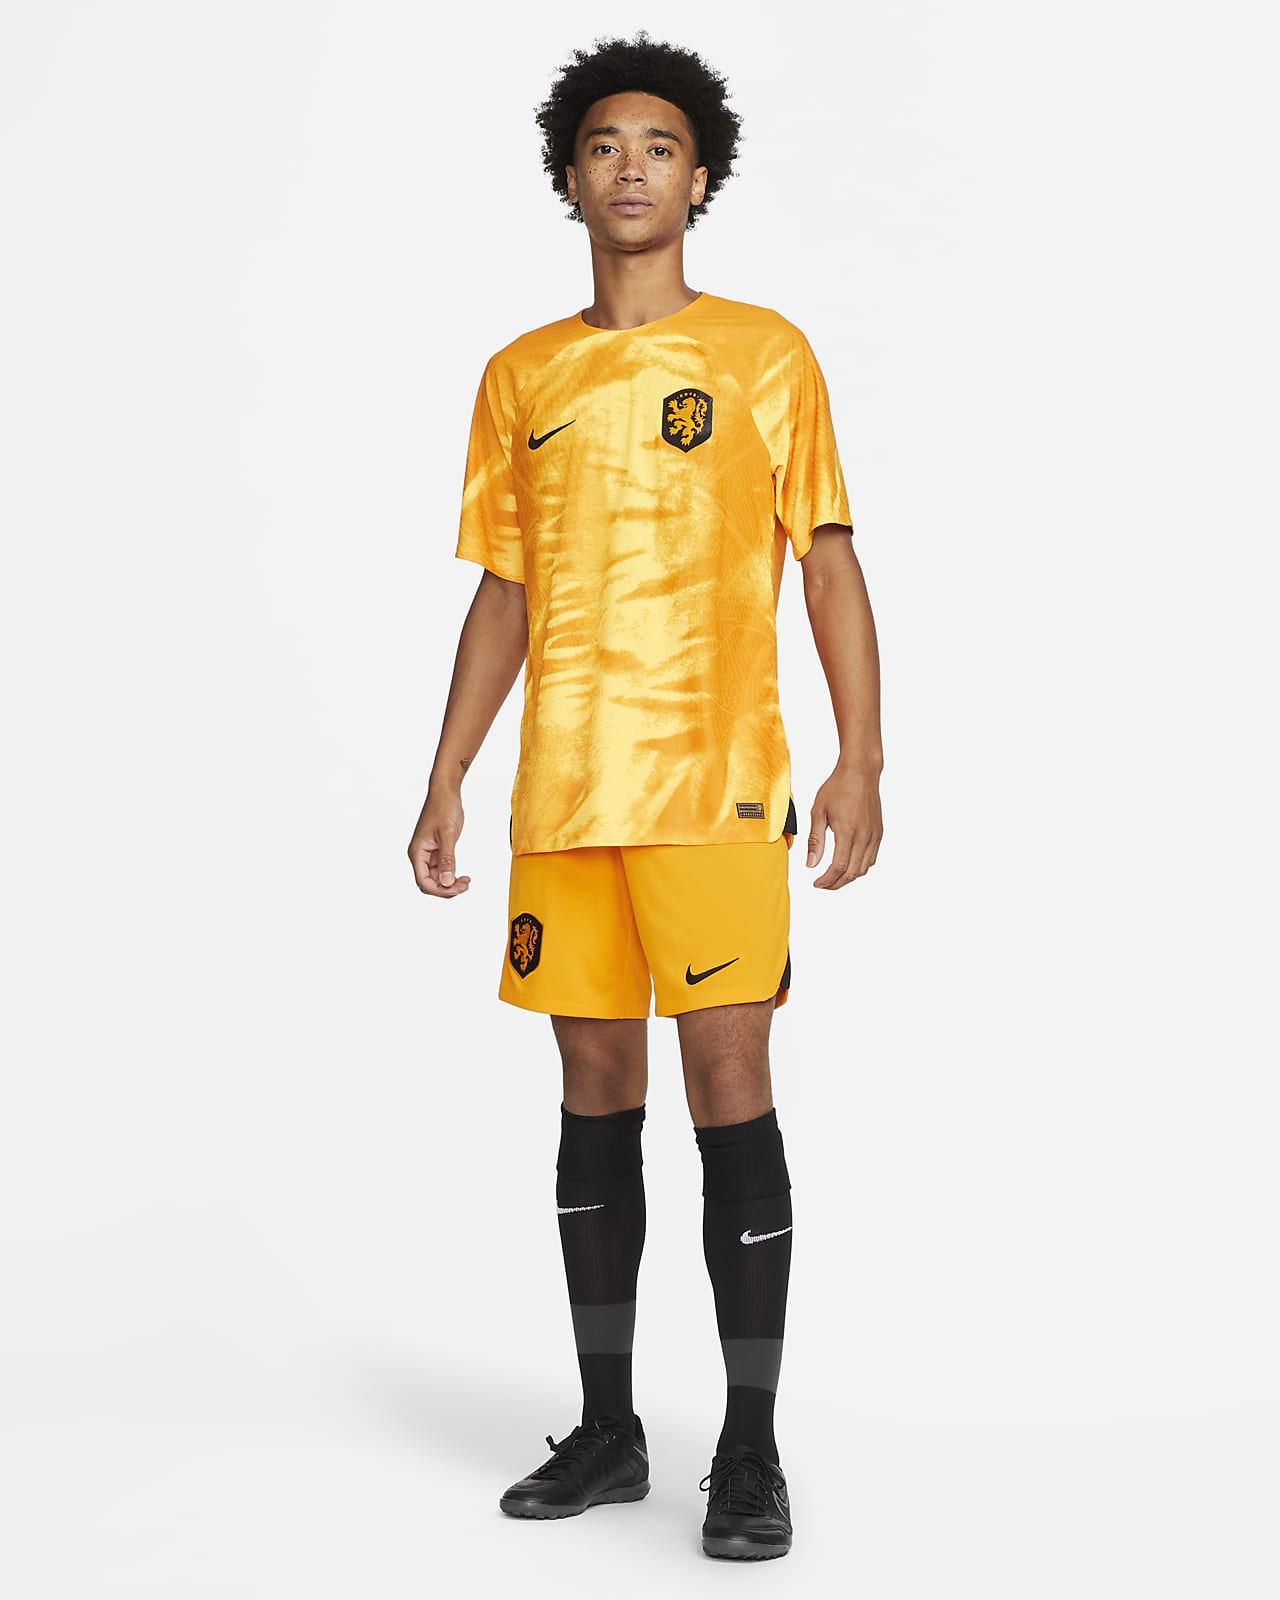 2022/23 Match Thuis Nike Dri-FIT ADV voetbalshirt voor heren. BE